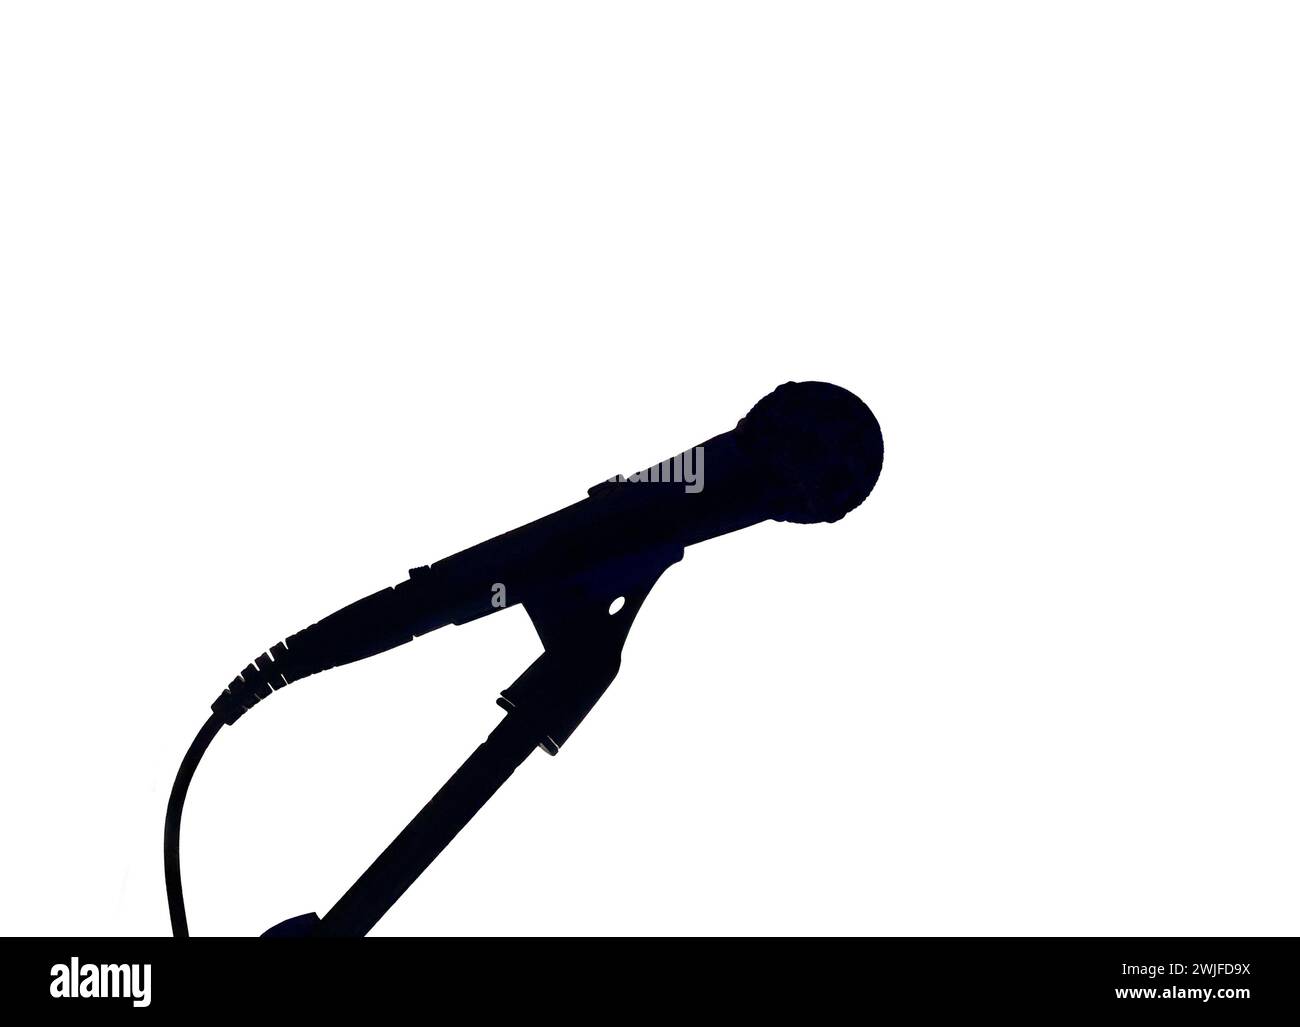 Silhouette of a microphone on a standf isolated on a white background. No people. Music and entertainment concept. Stock Photo